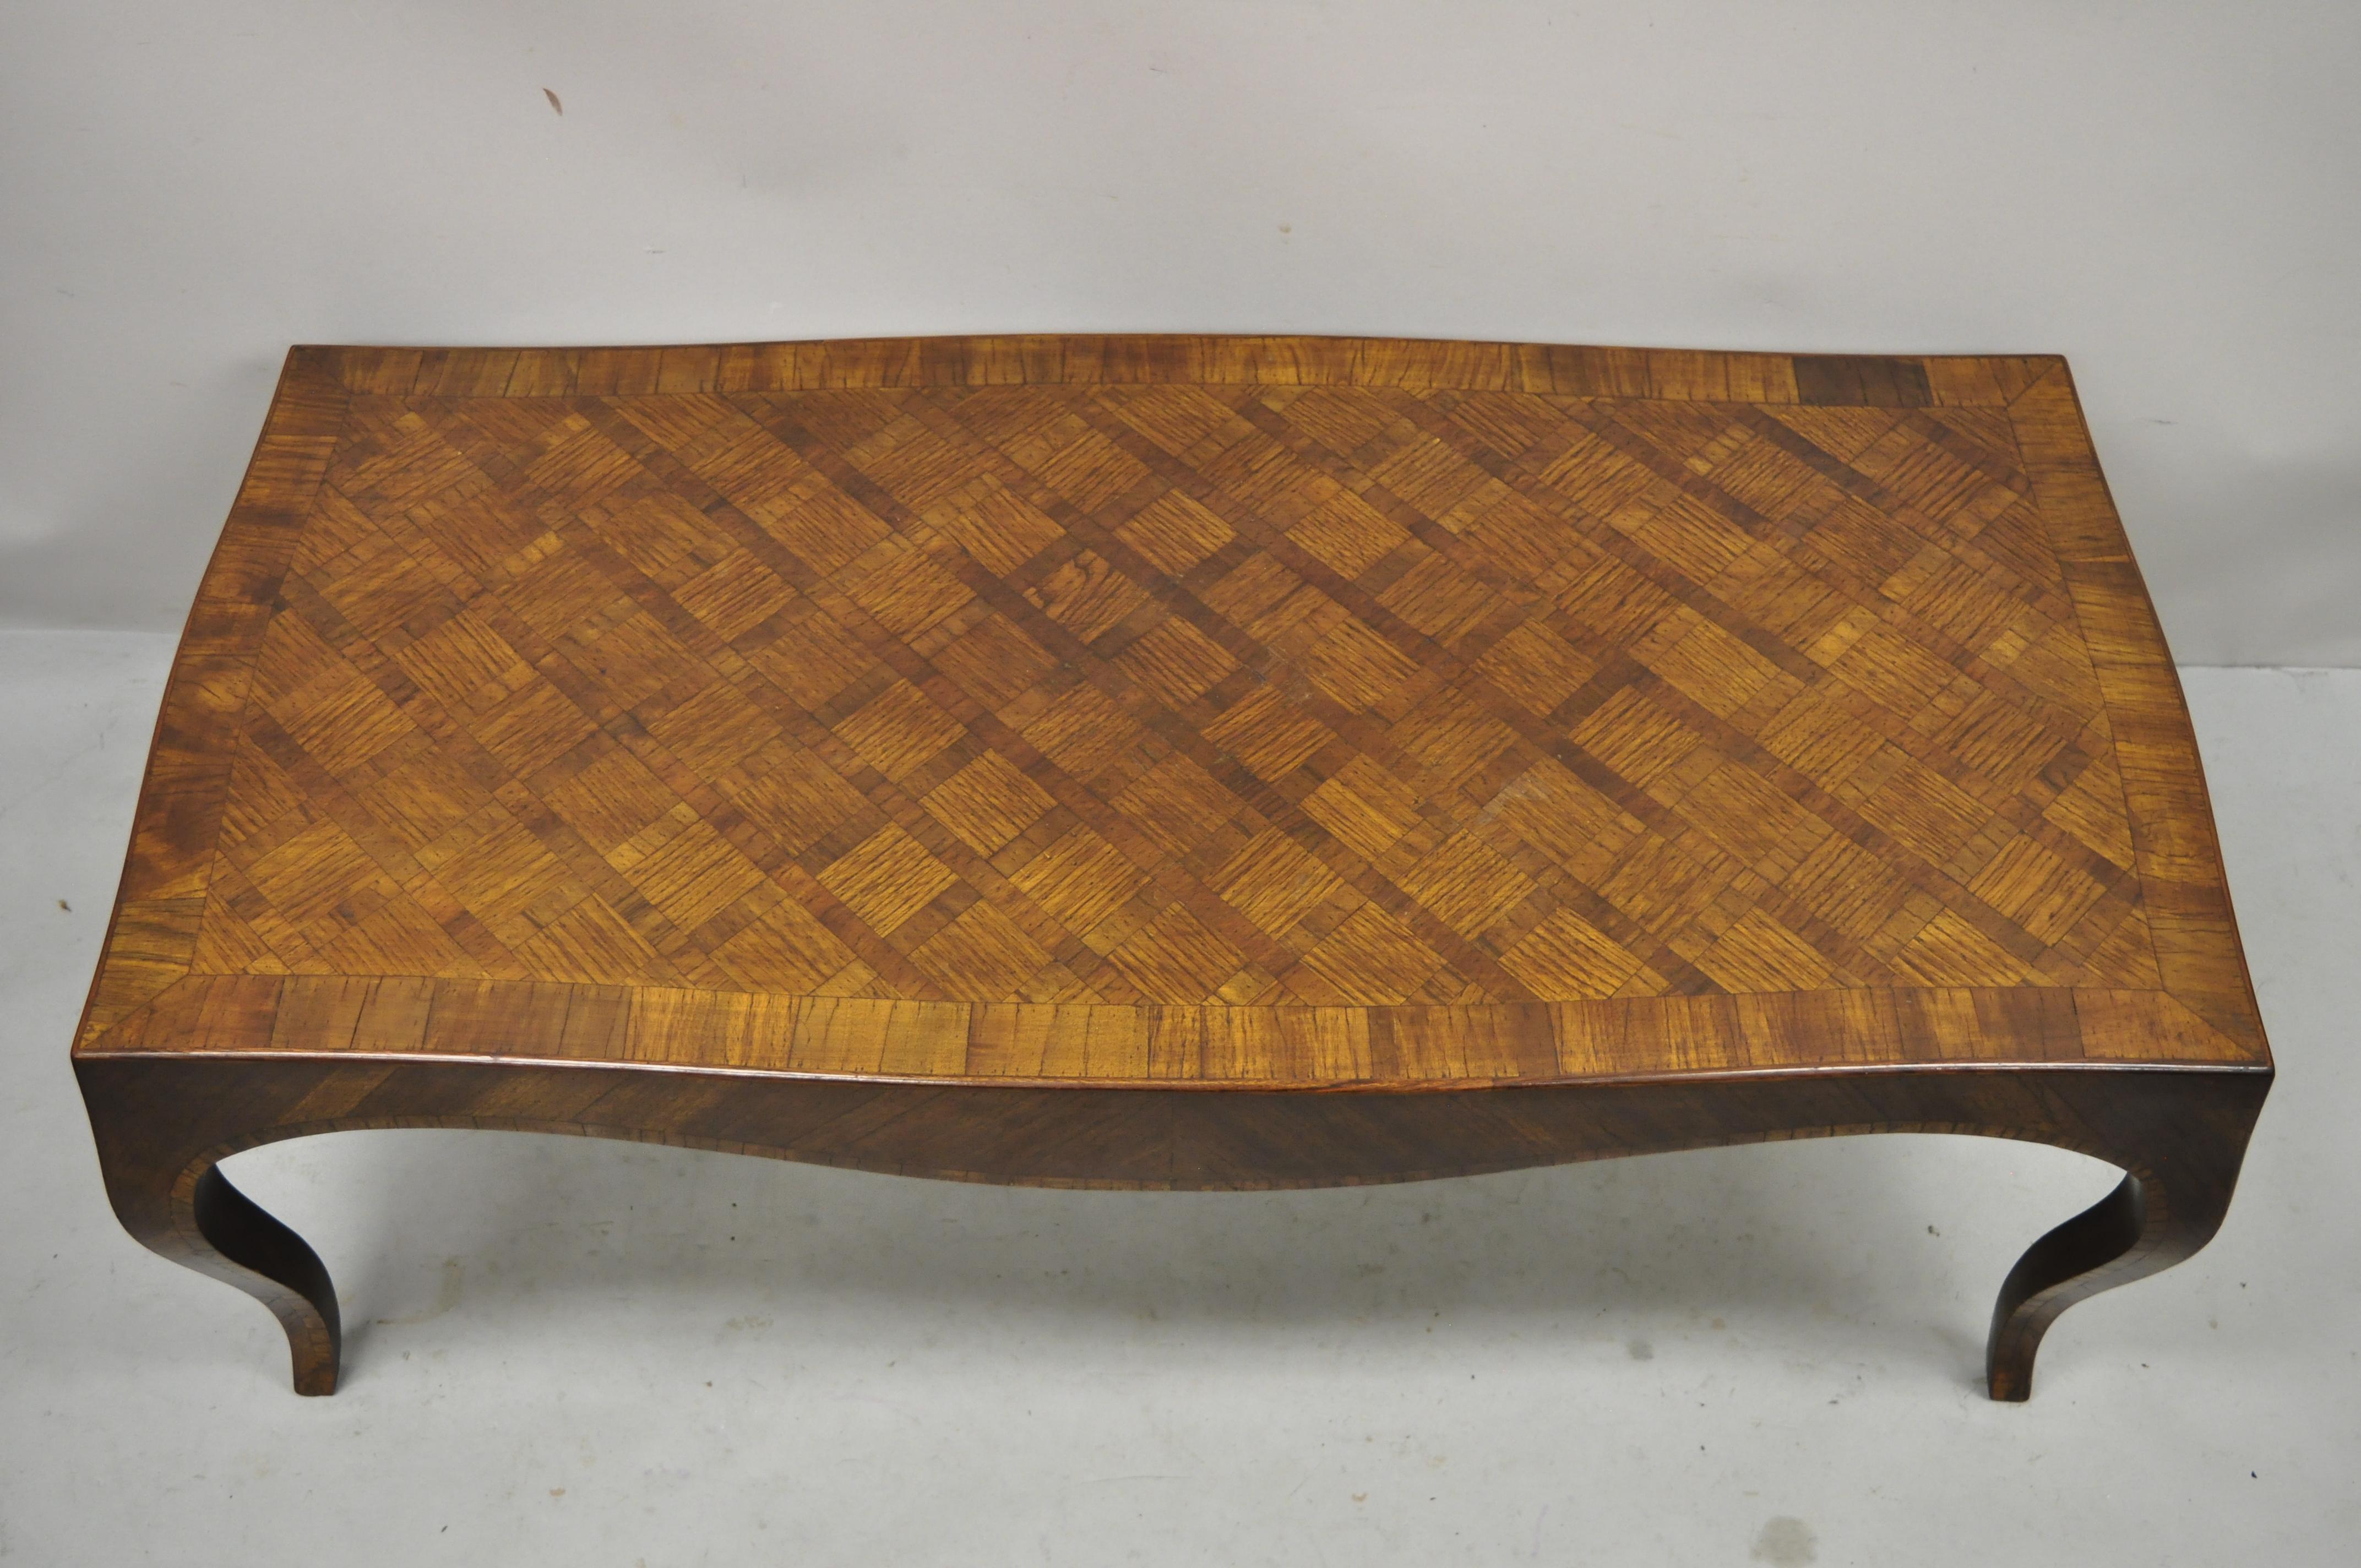 Hollywood Regency Vintage Italian Parquetry Inlay Olive Wood Mid Century Long Coffee Table